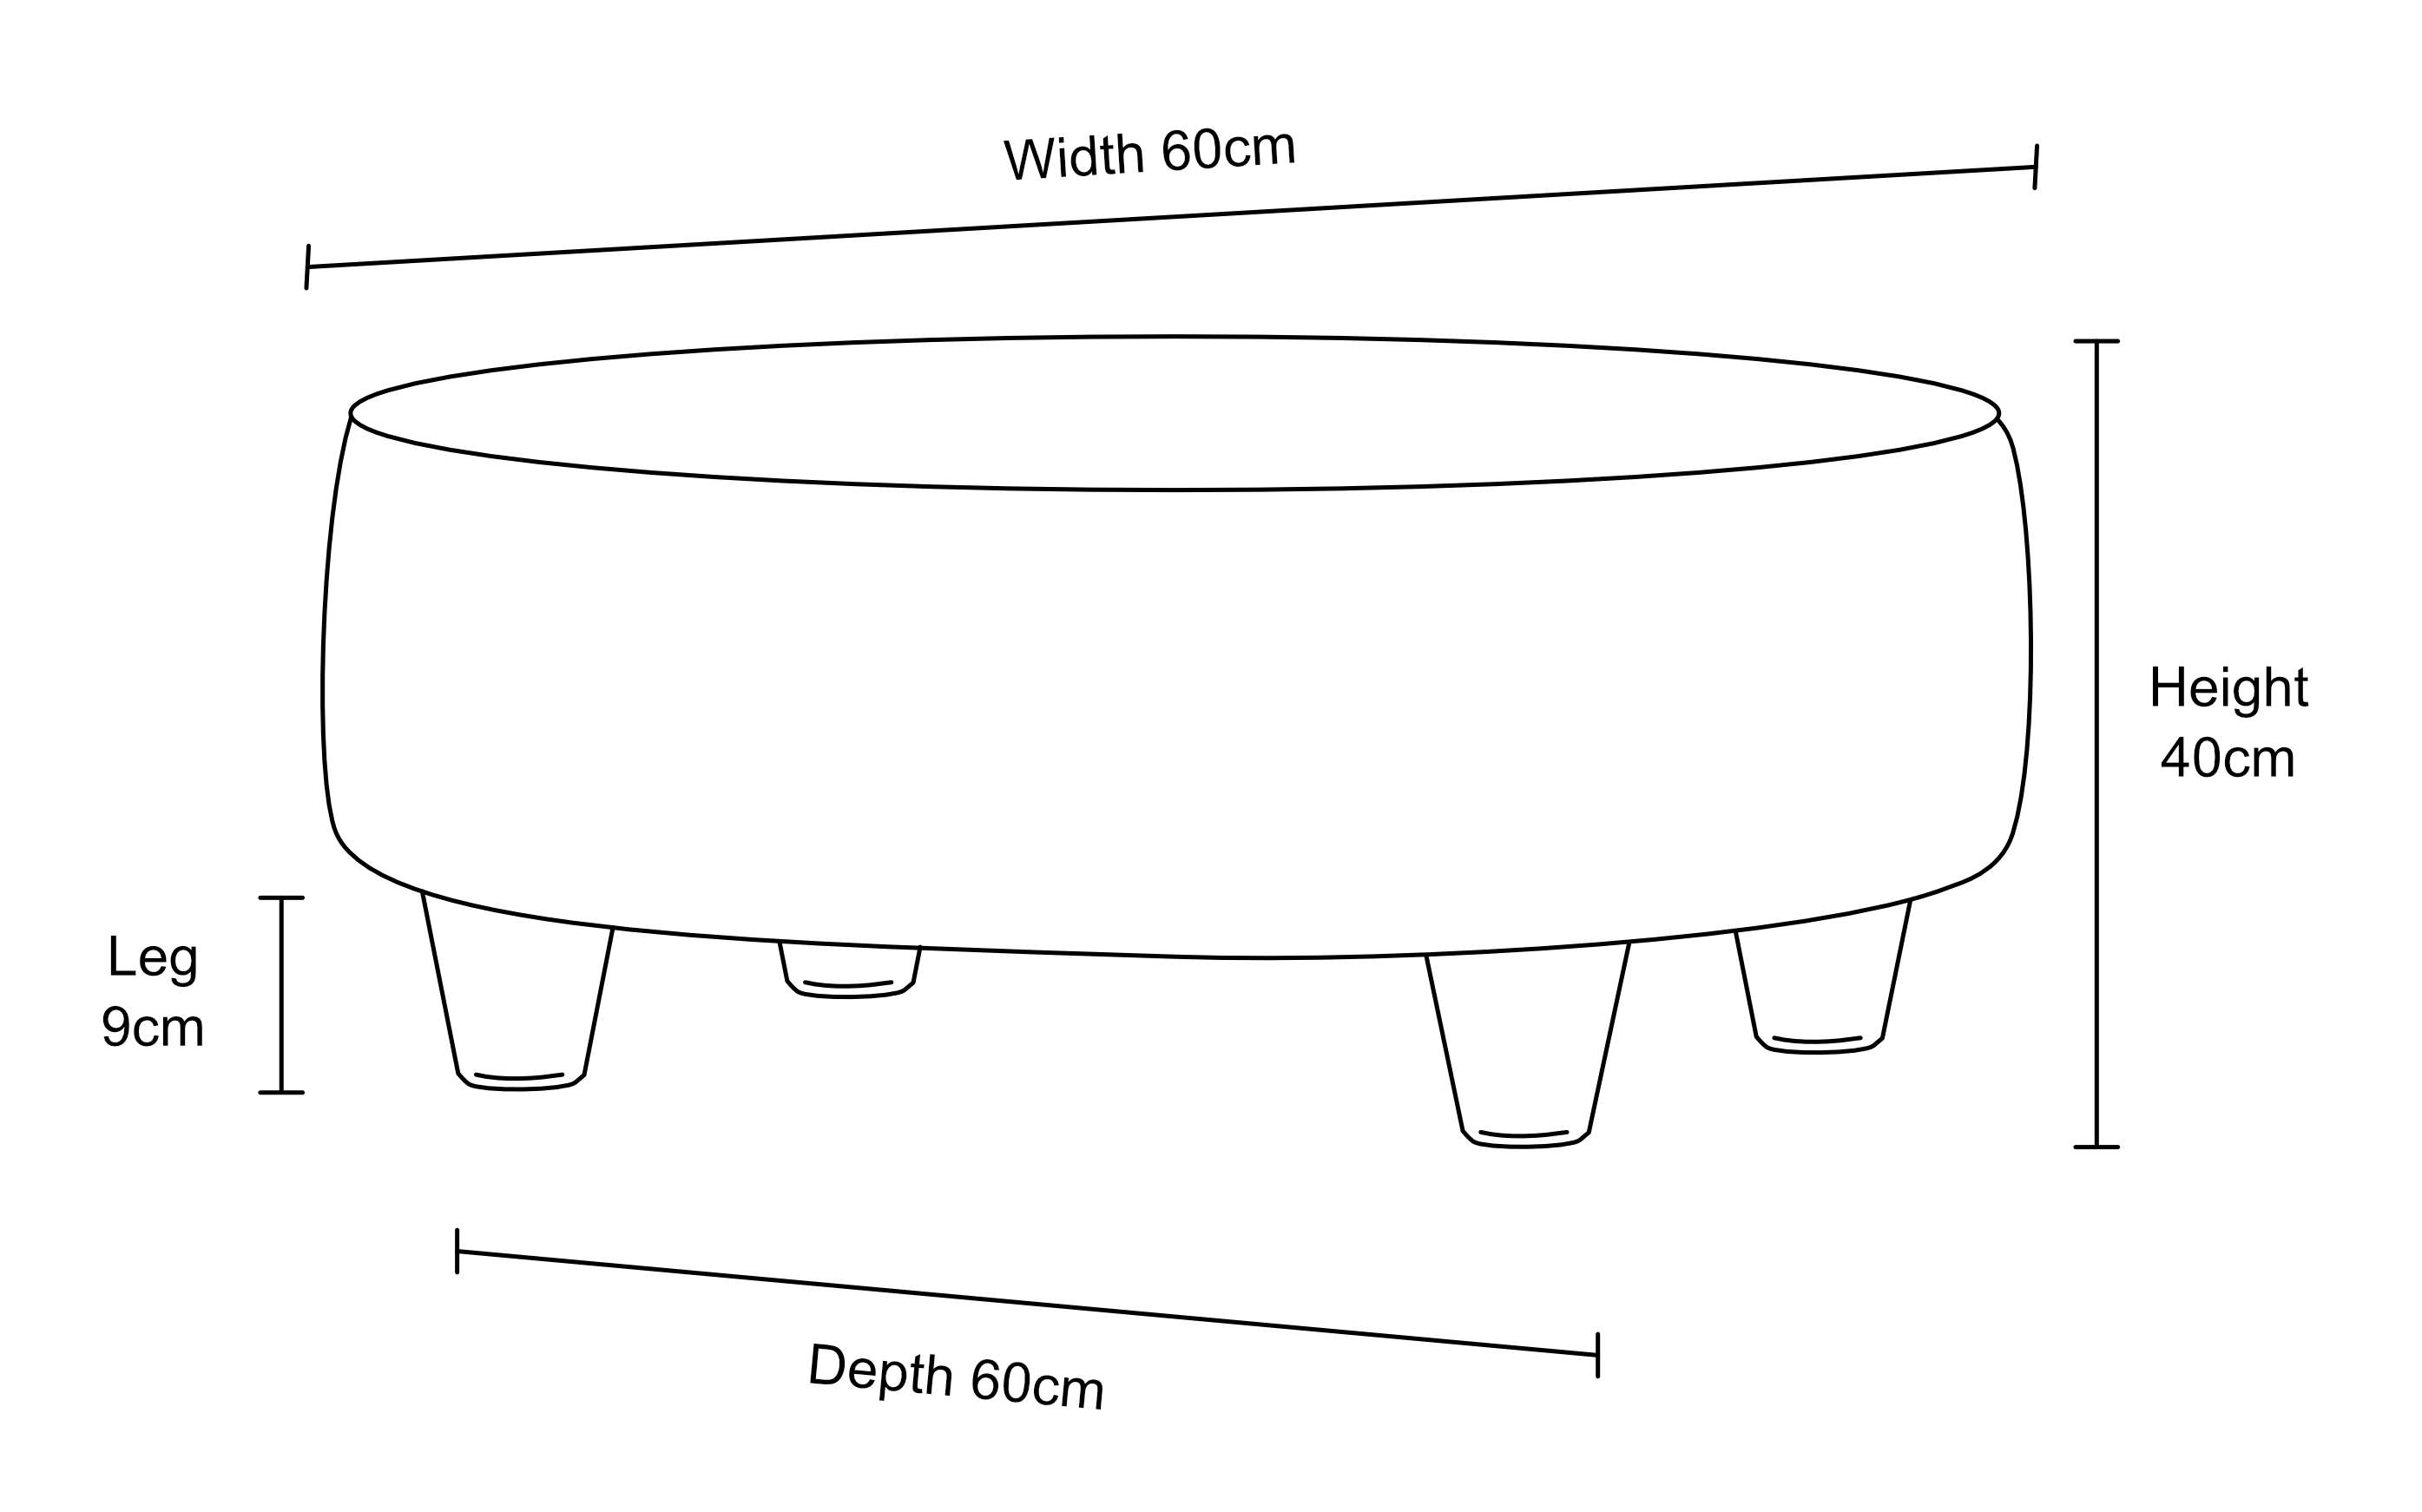 https://www.footstools.co.uk/wp-content/uploads/round-footstool-24x24-dimensions.jpg